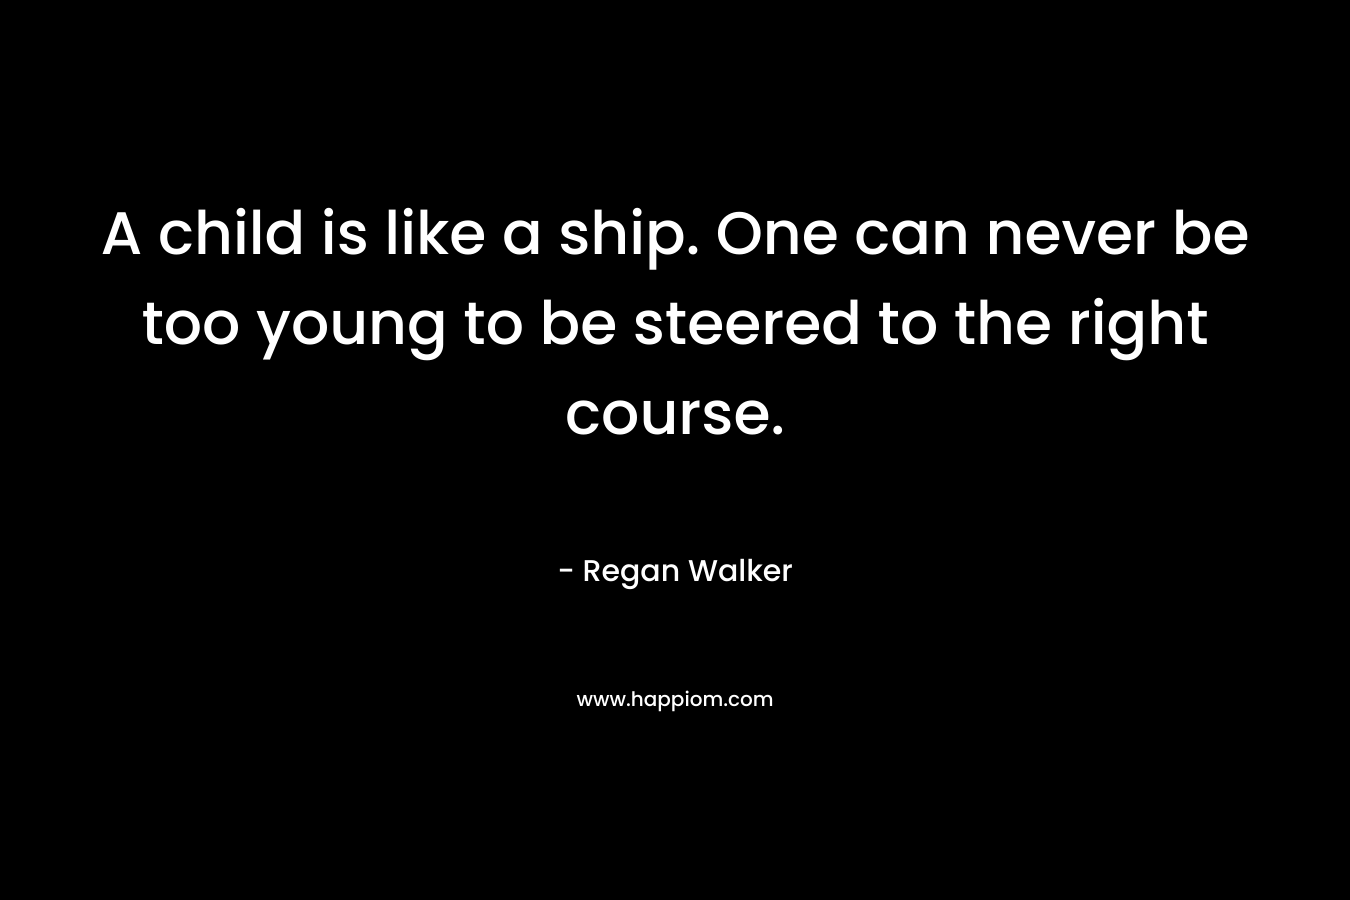 A child is like a ship. One can never be too young to be steered to the right course.